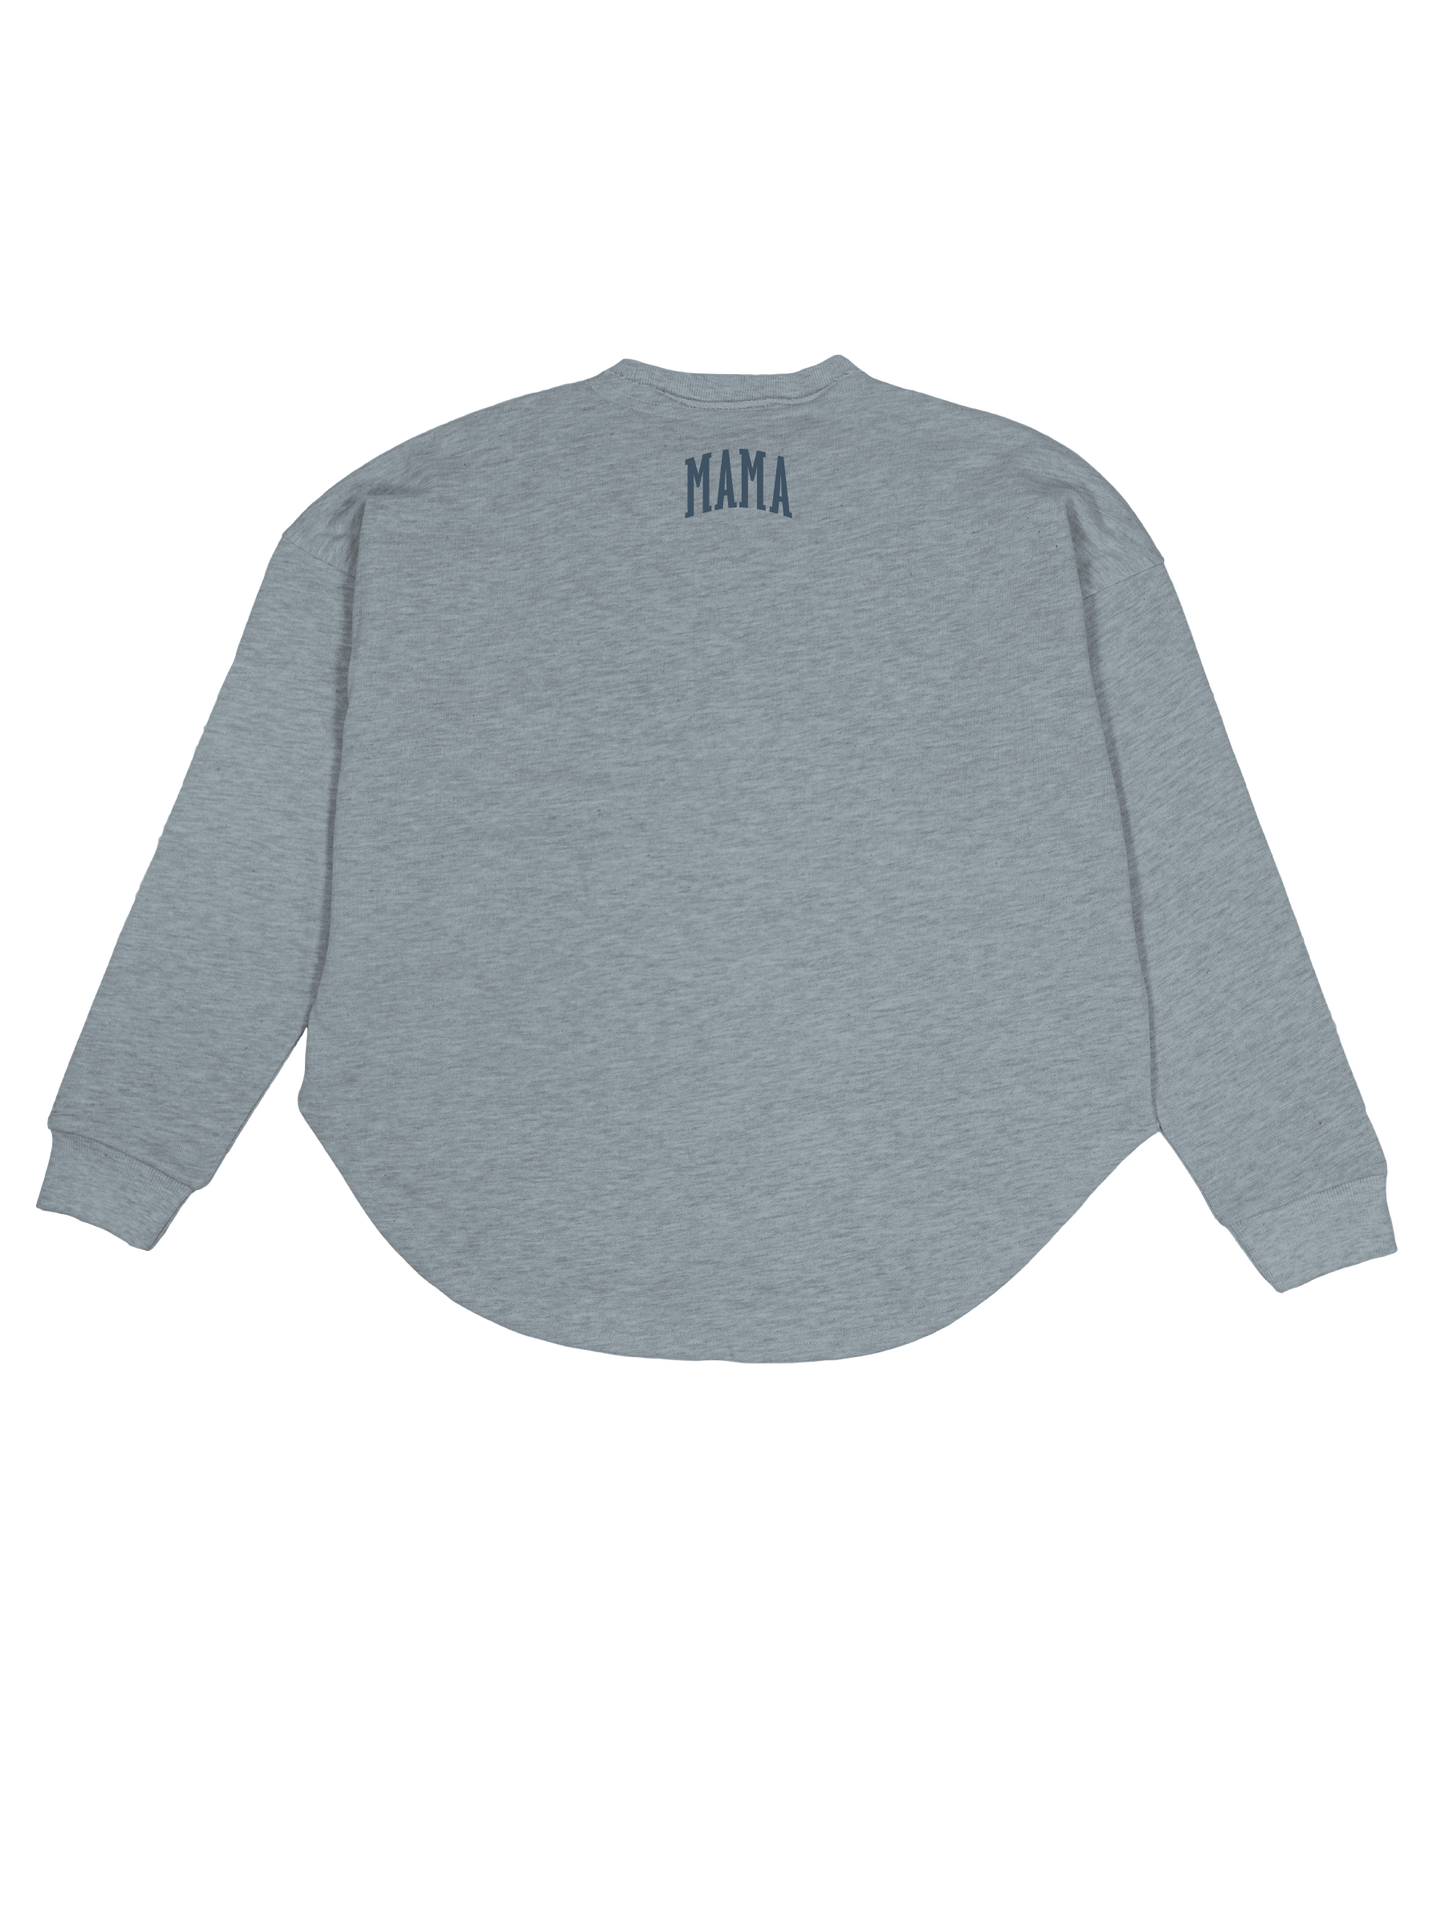 Ladies Simply Southern MAMA L/S Grey